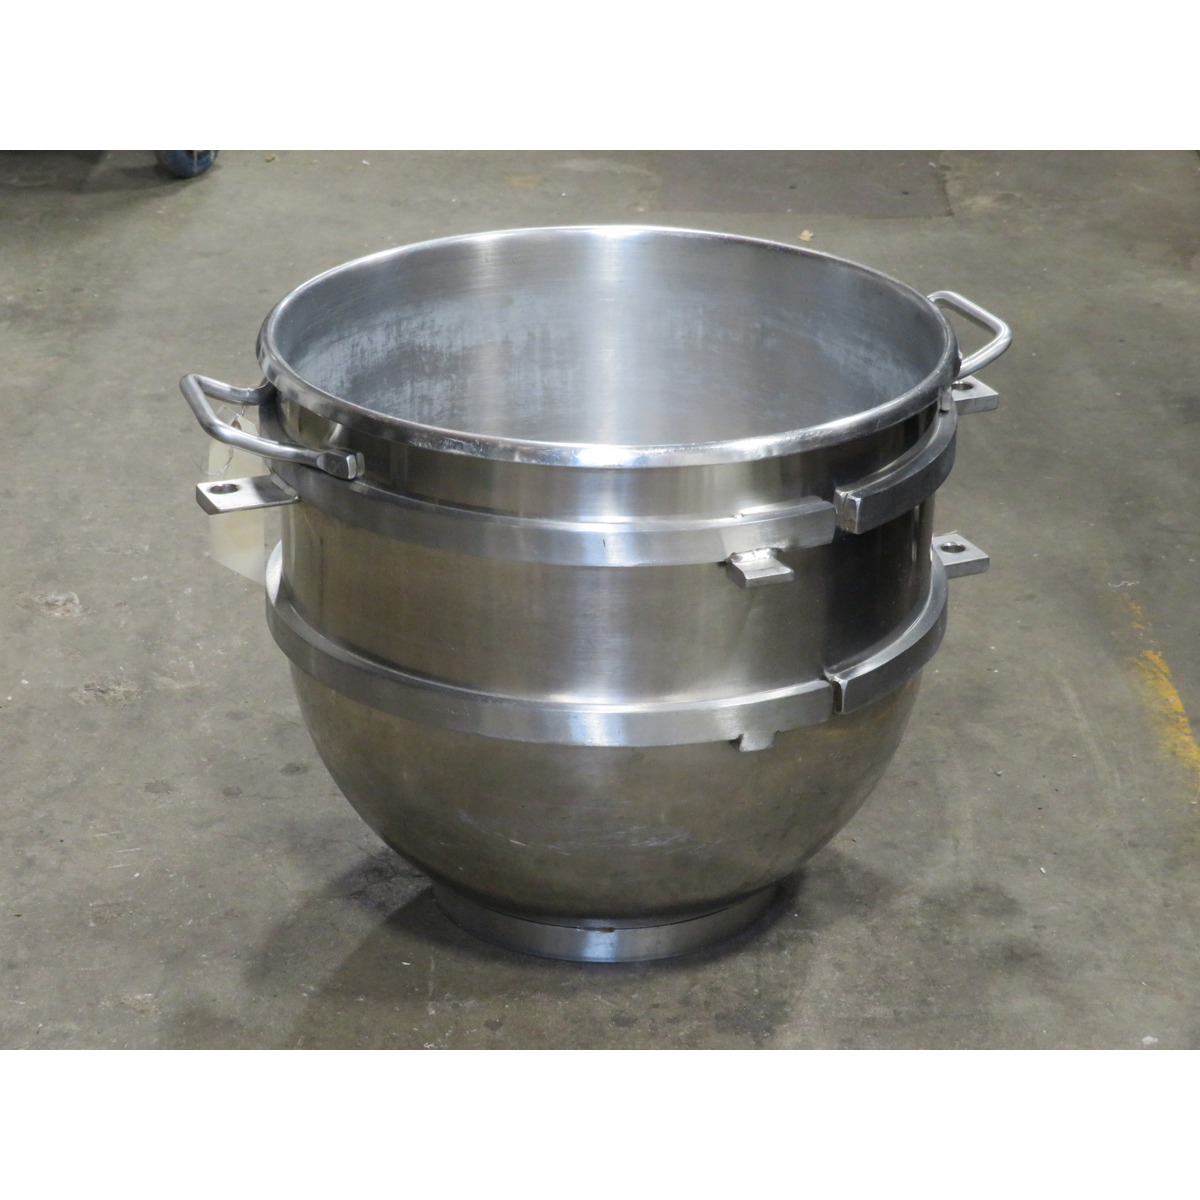 Hobart BOWL-HL60 Stainless Steel 60 Qt Bowl for HL600, Used Excellent Condition image 1